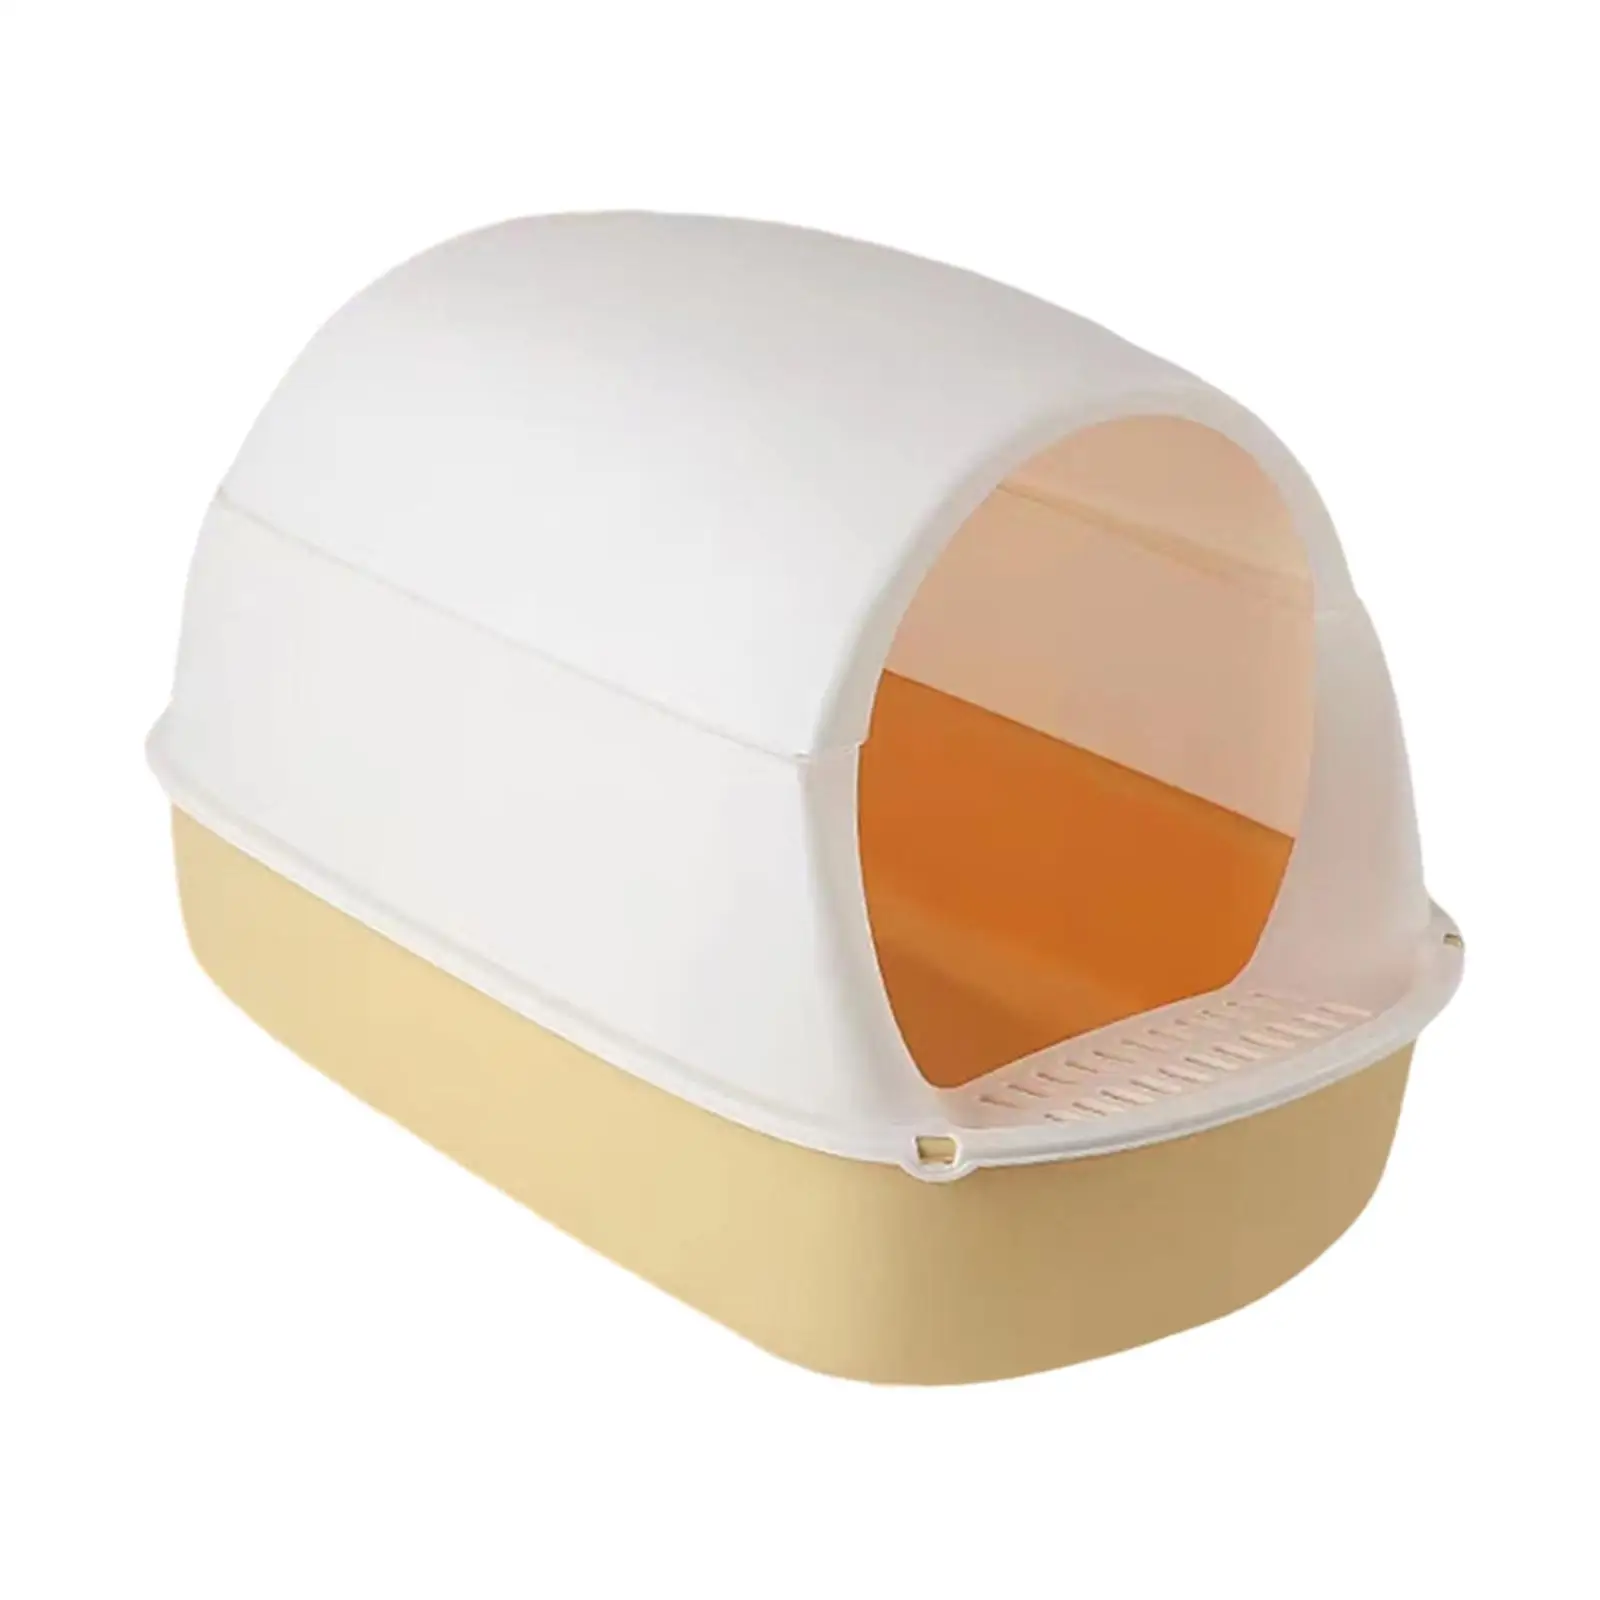 Hooded Cat Litter Box with Lid Detachable Pet Supplies Durable for Indoor Cats Large Cat Potty Cat Litter Tray Cat Toilet